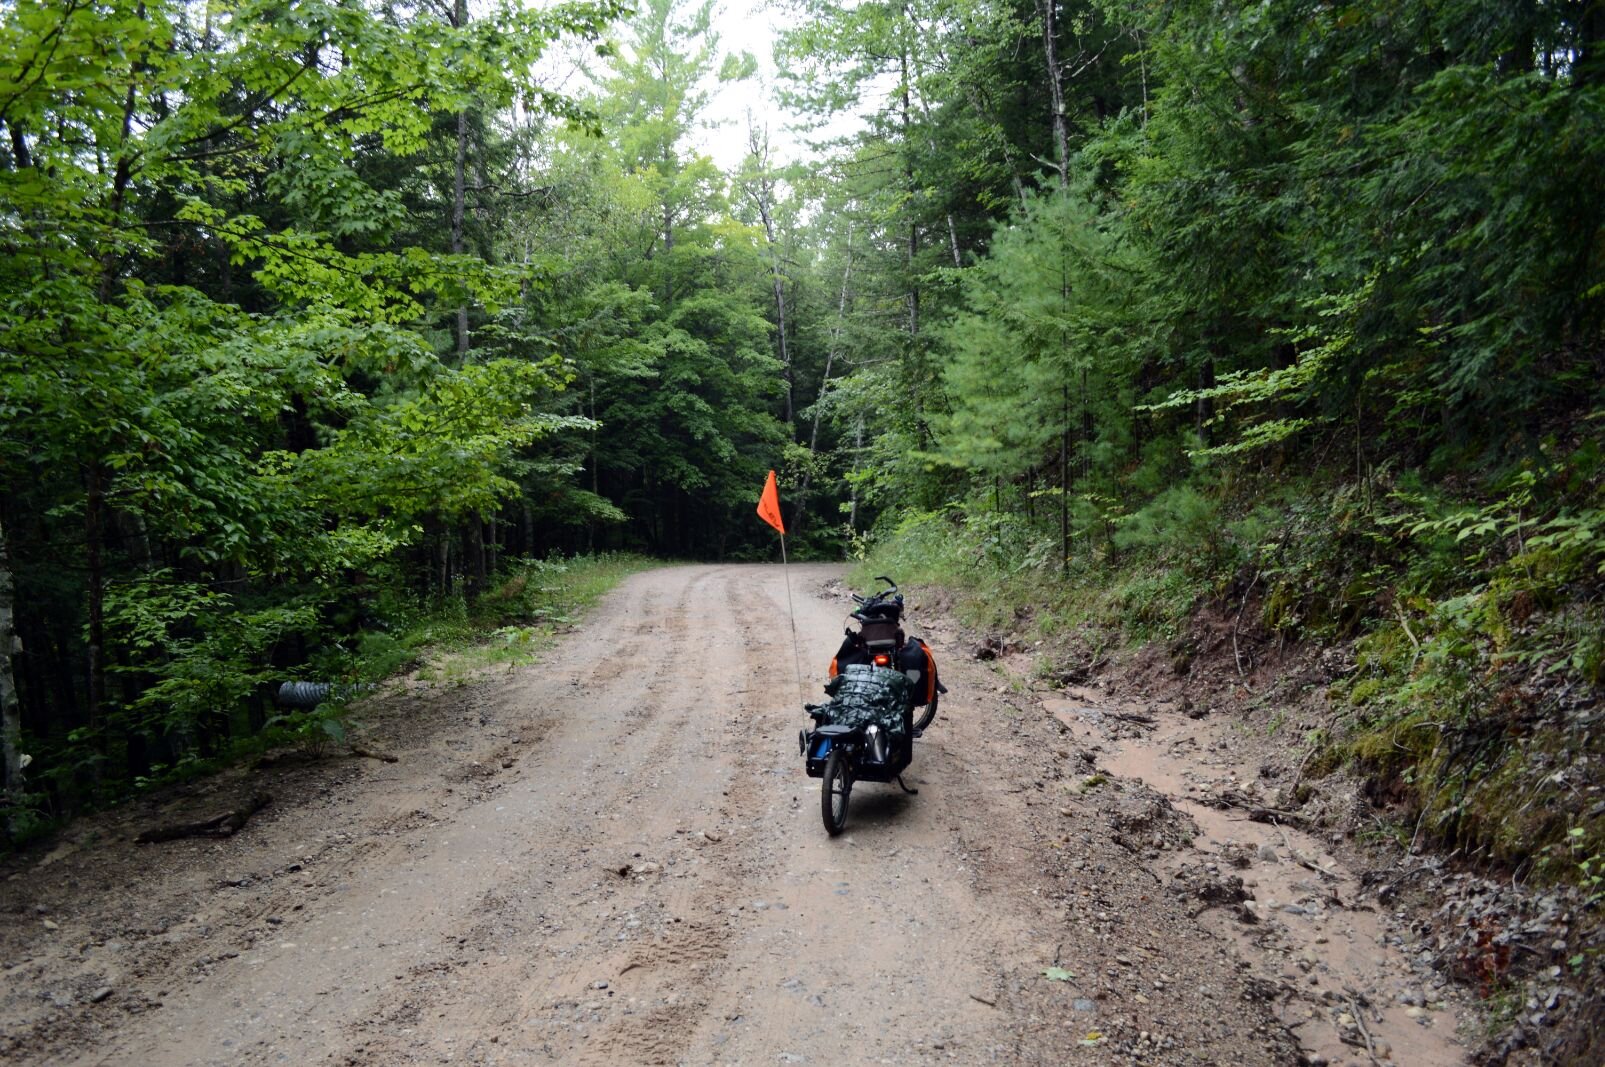 Climbing yet another dirt road hill. The Upper River Road, headed to Mesick via scenic route/